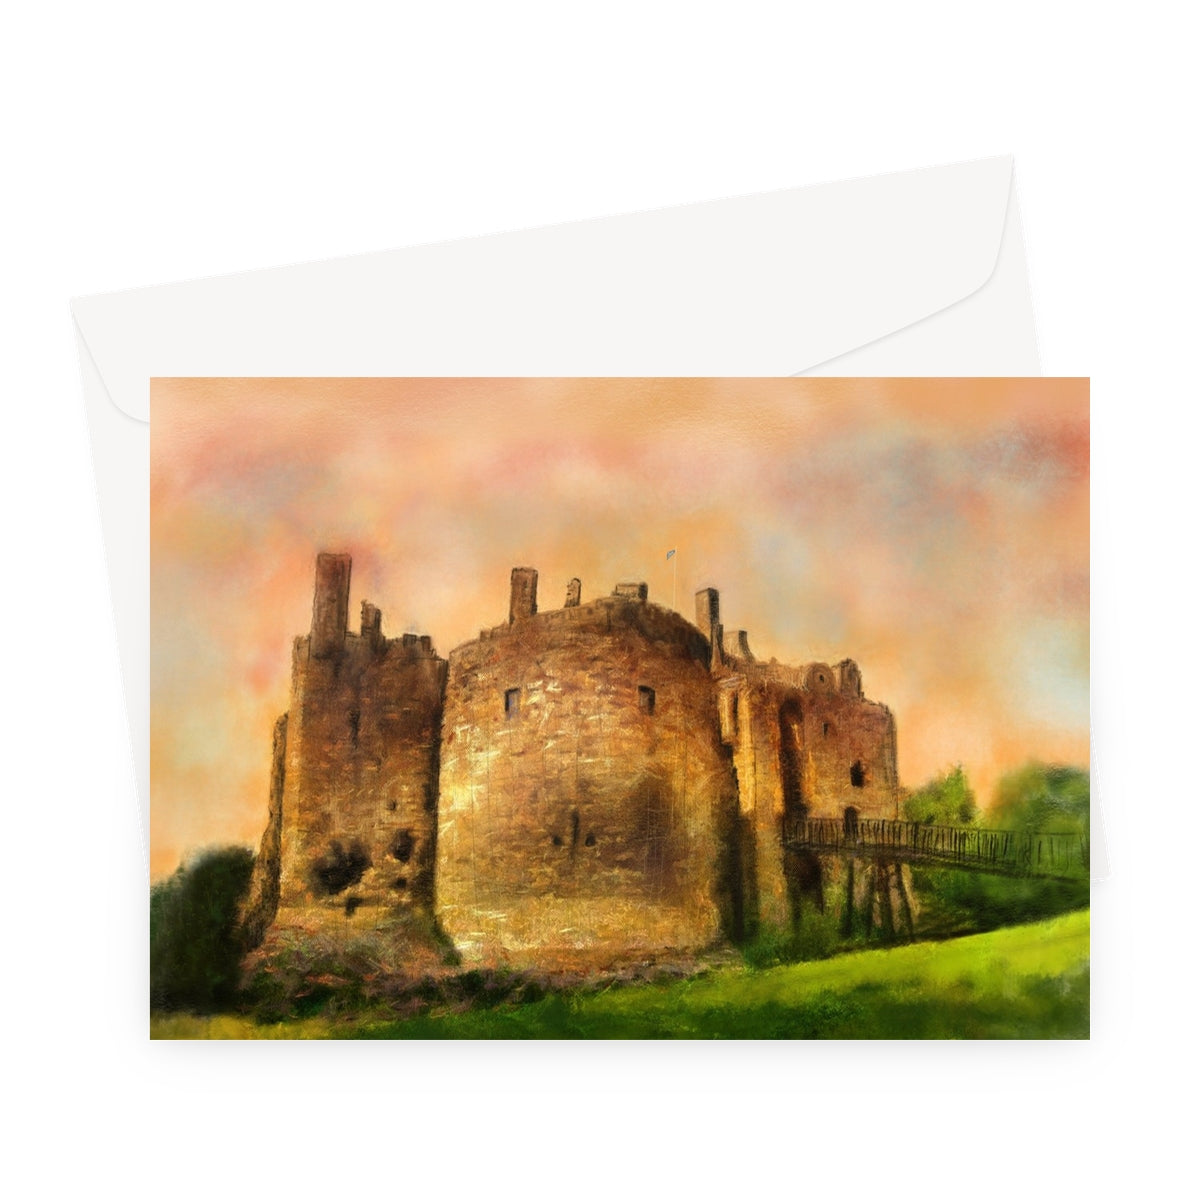 Dirleton Castle Art Gifts Greeting Card-Stationery-Prodigi-A5 Landscape-10 Cards-Paintings, Prints, Homeware, Art Gifts From Scotland By Scottish Artist Kevin Hunter